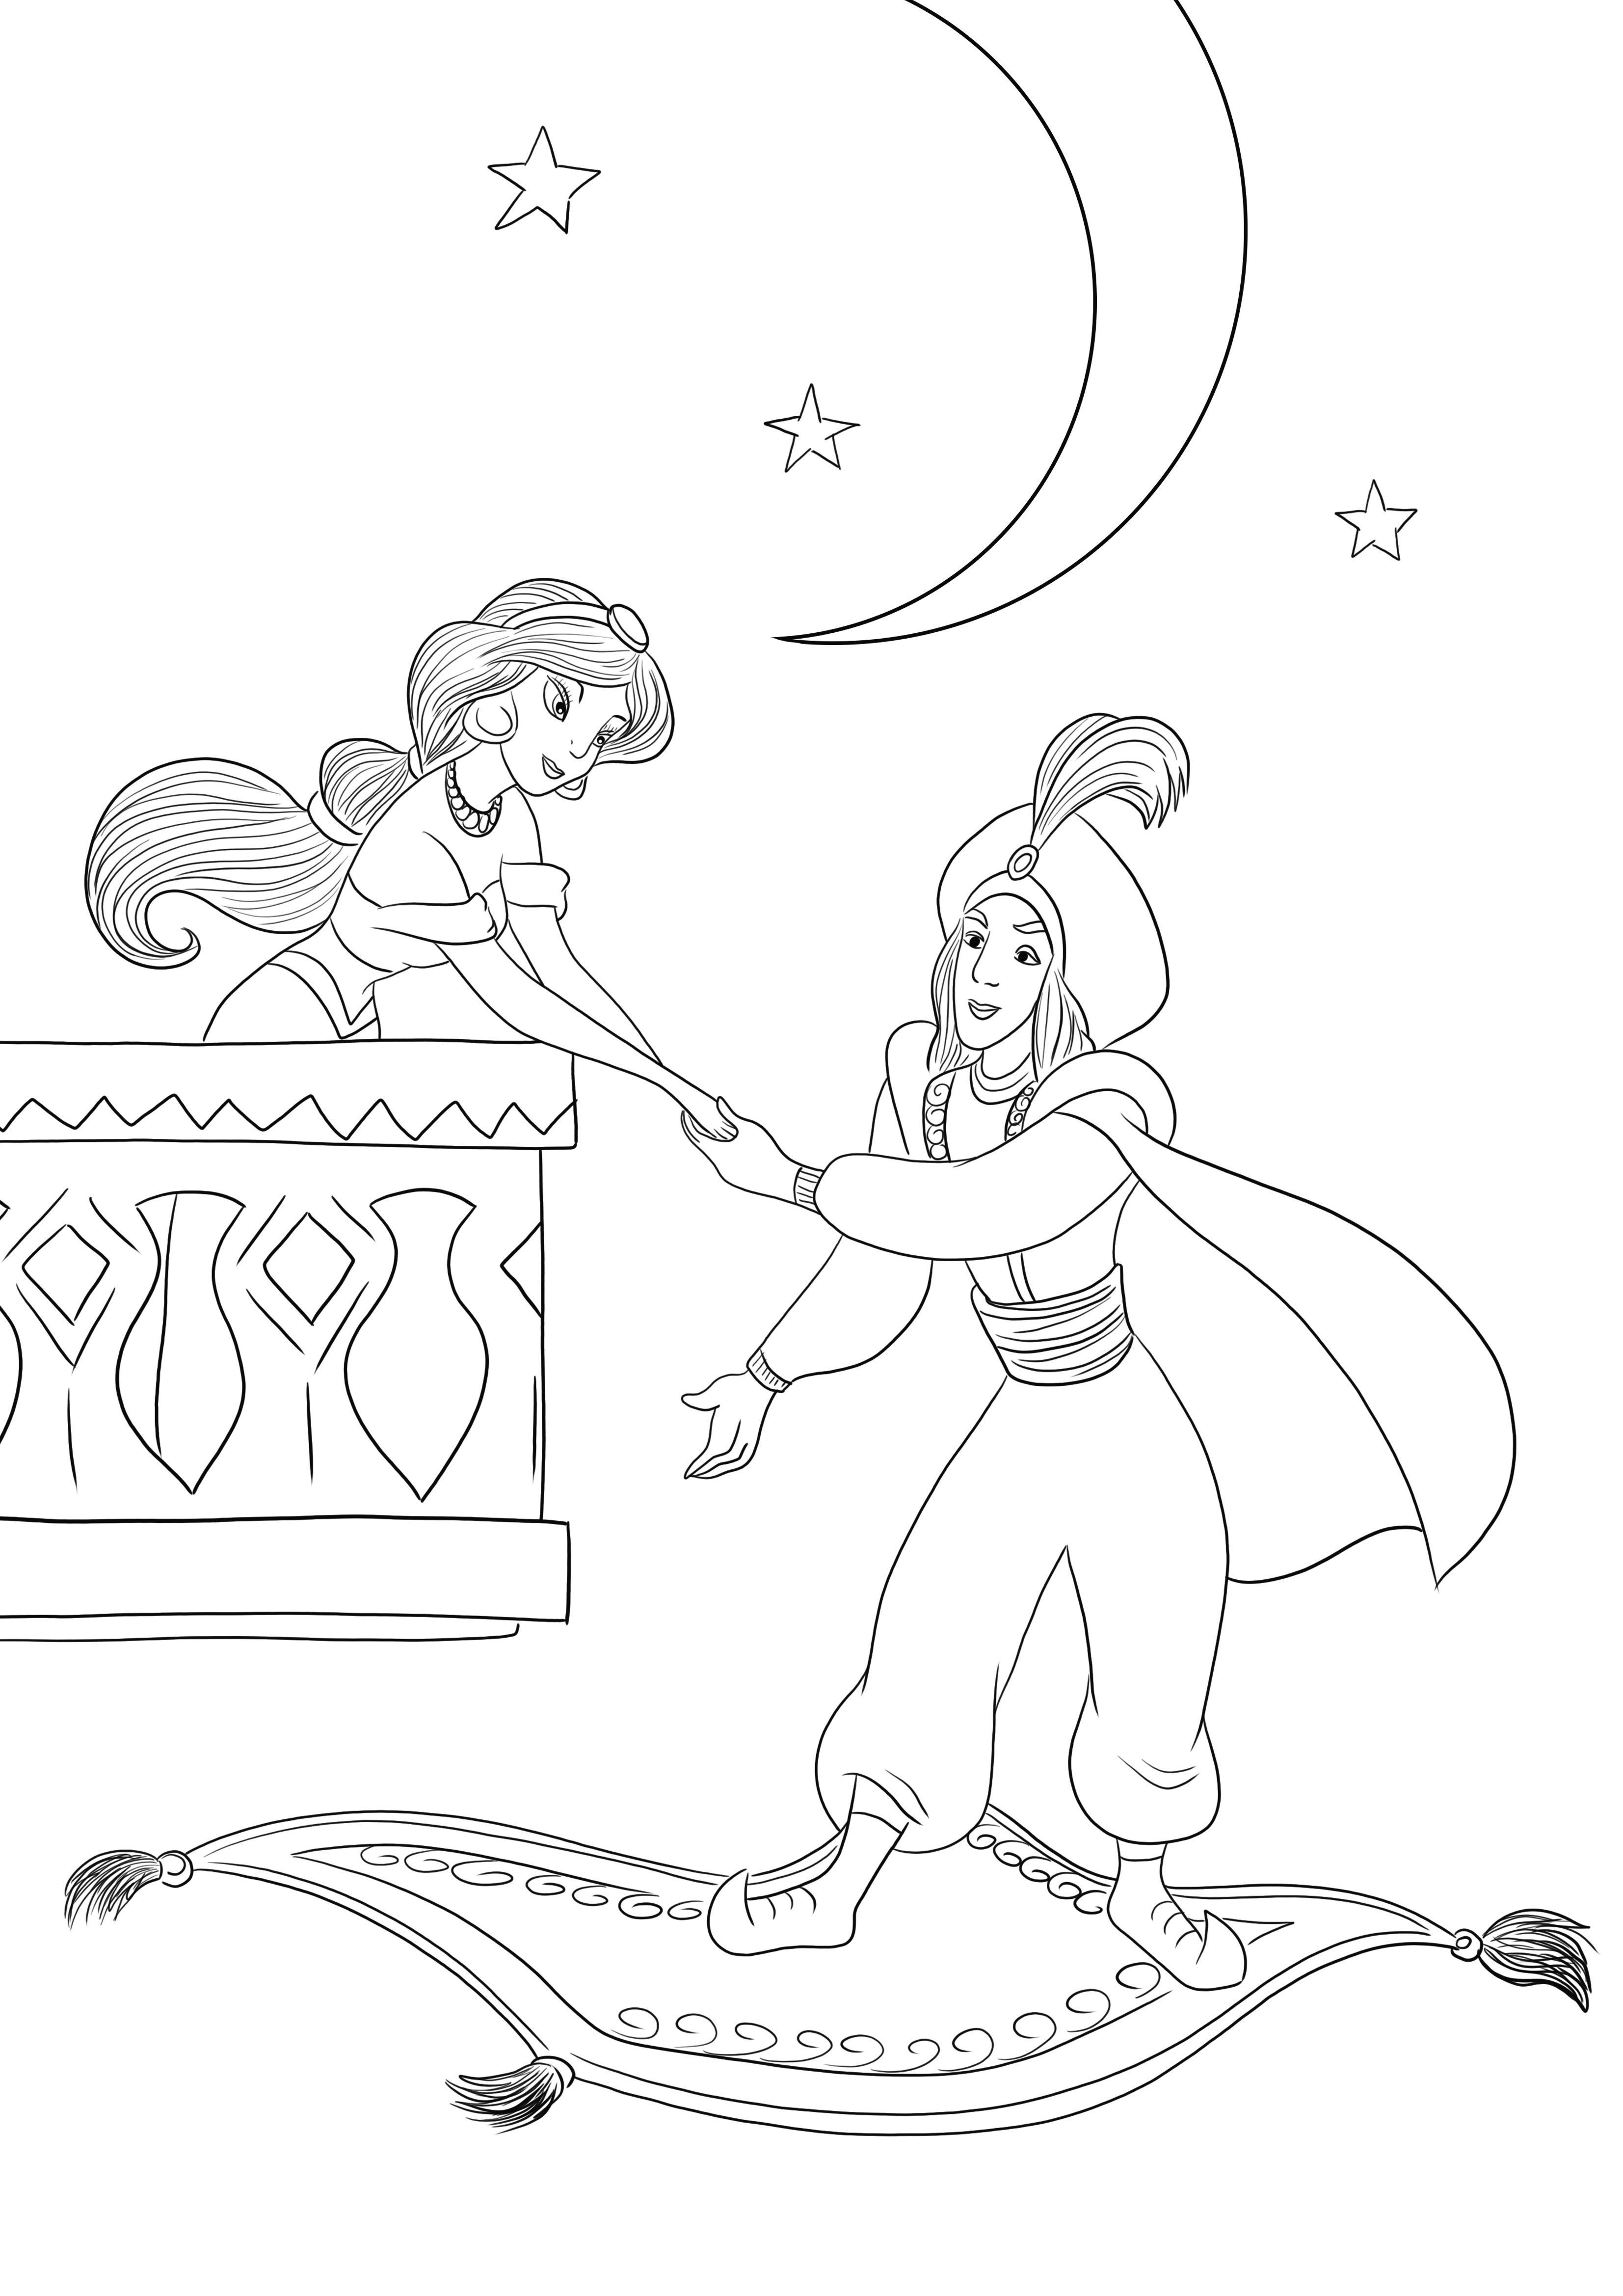 A free coloring image of Prince Ali meeting Jasmine to download or print